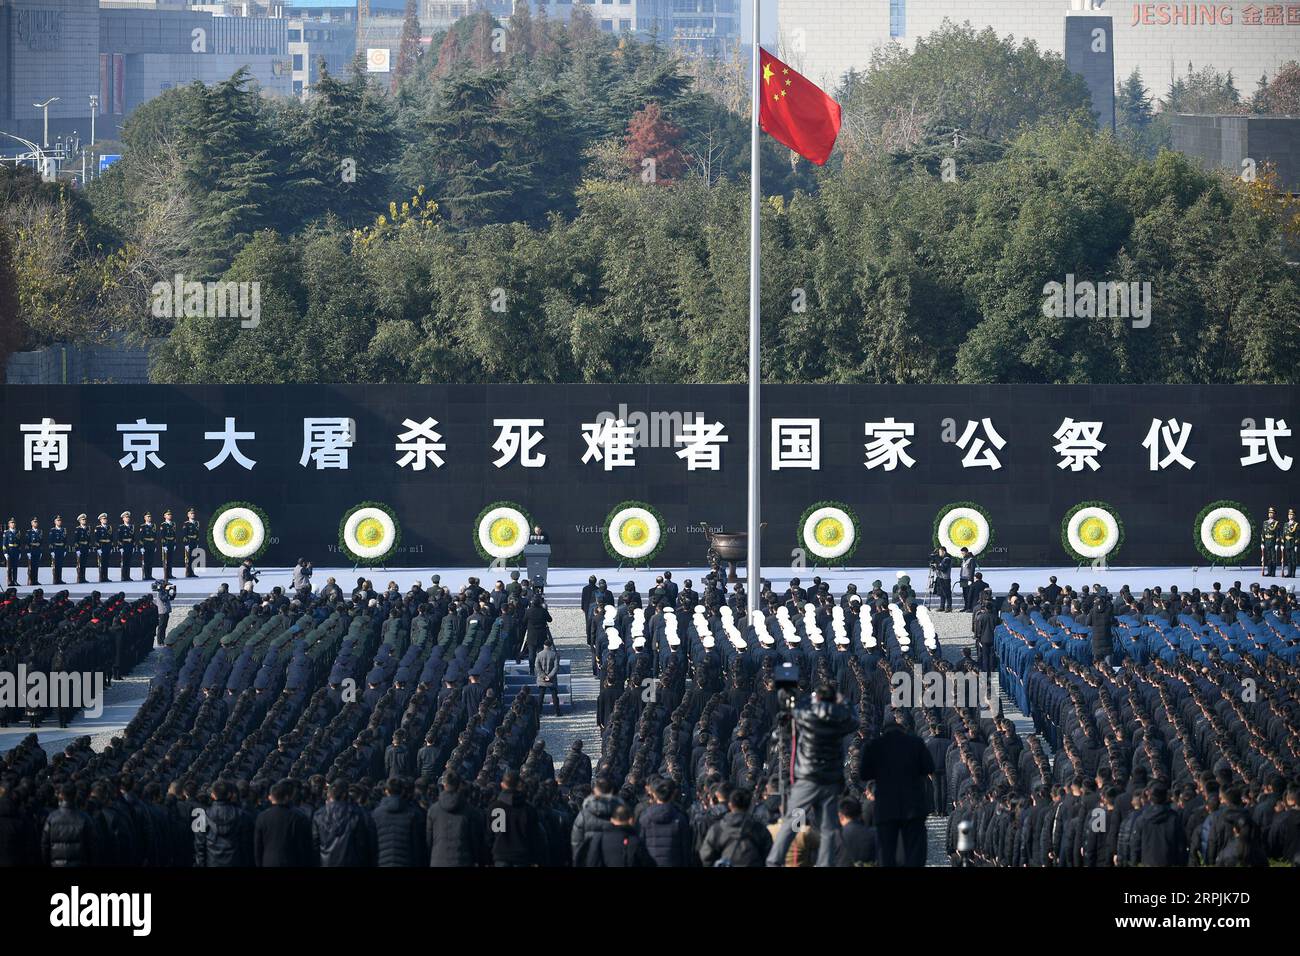 191213 -- NANJING, Dec. 13, 2019 -- Photo taken on Dec. 13, 2019 shows the scene of a national memorial ceremony to commemorate the victims of the Nanjing Massacre at the memorial hall for the massacre victims in Nanjing, east China s Jiangsu Province.  Xinhua Headlines: China holds national memorial ceremony for Nanjing Massacre victims HanxYuqing PUBLICATIONxNOTxINxCHN Stock Photo